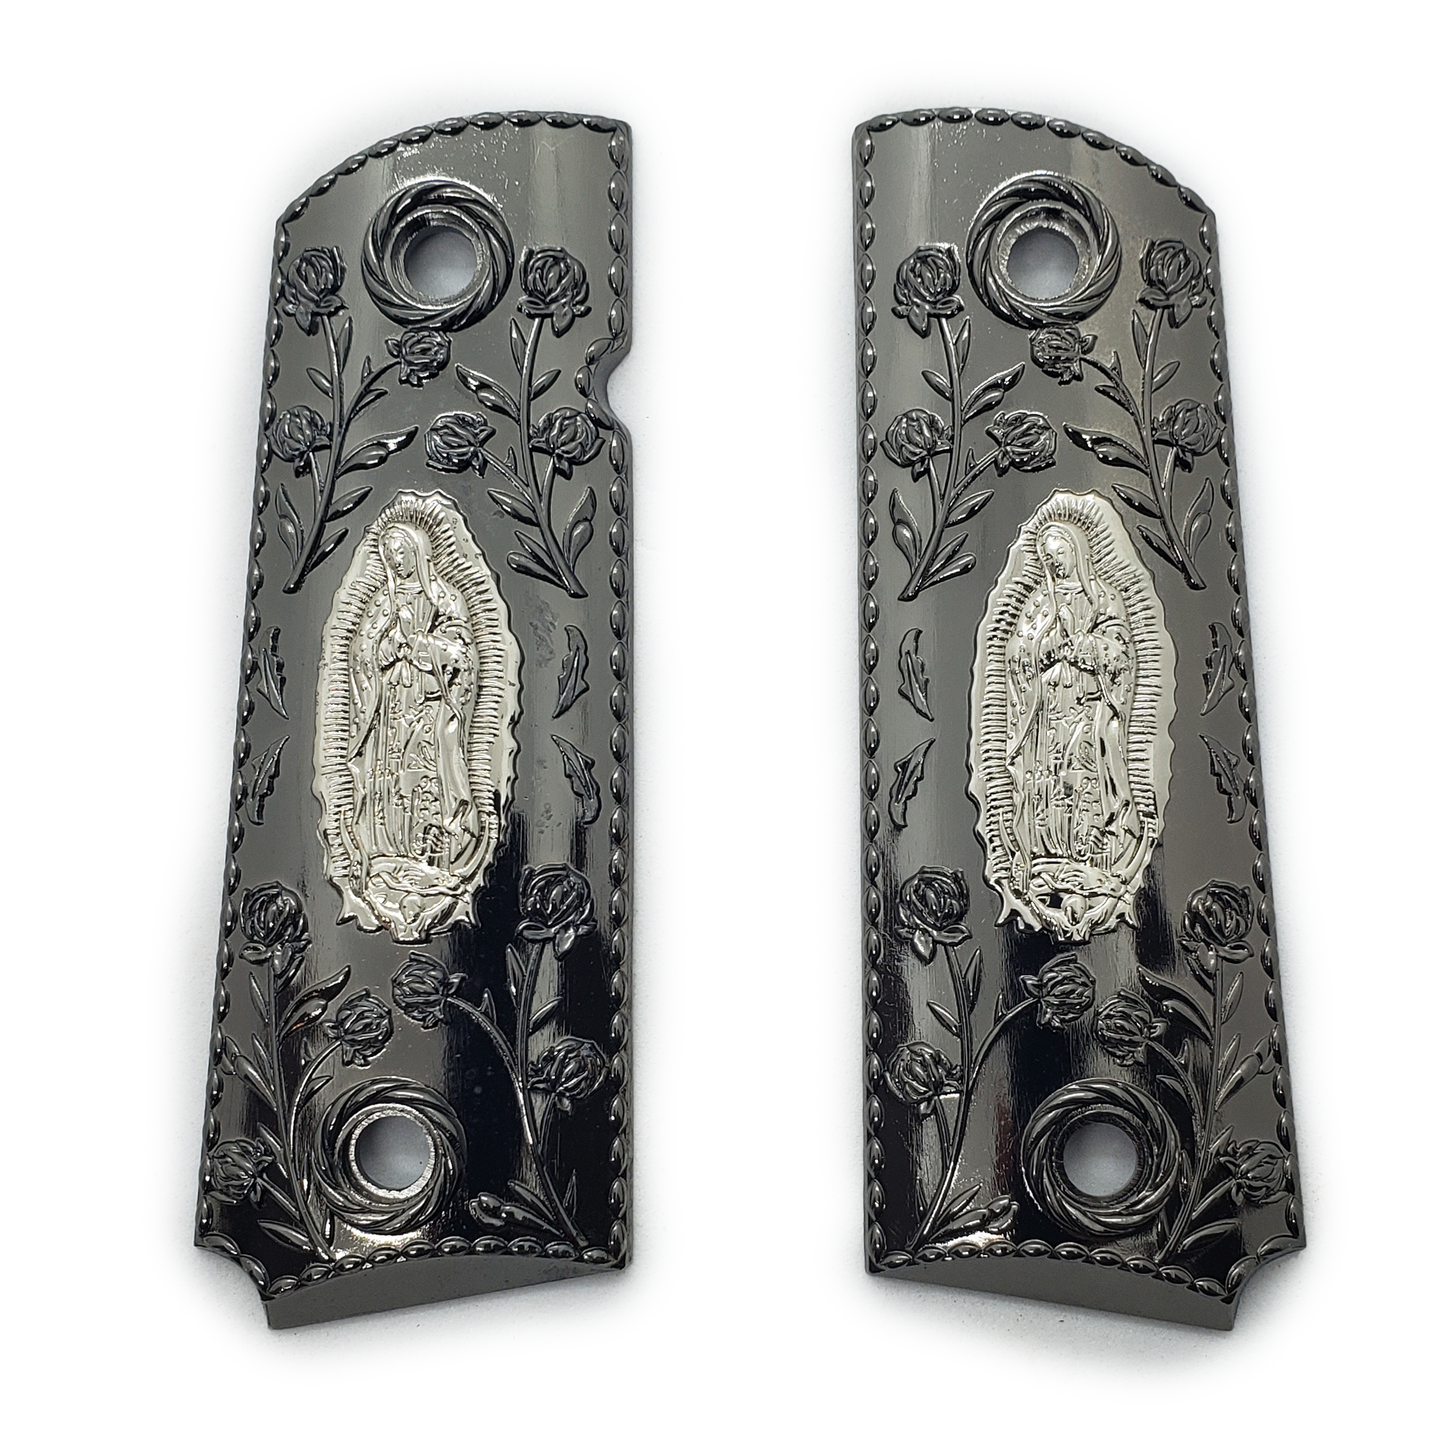 1911 GRIPS FULL SIZE - Metal - Virgin Mary Scroll W Ambi Safety #T-VM01